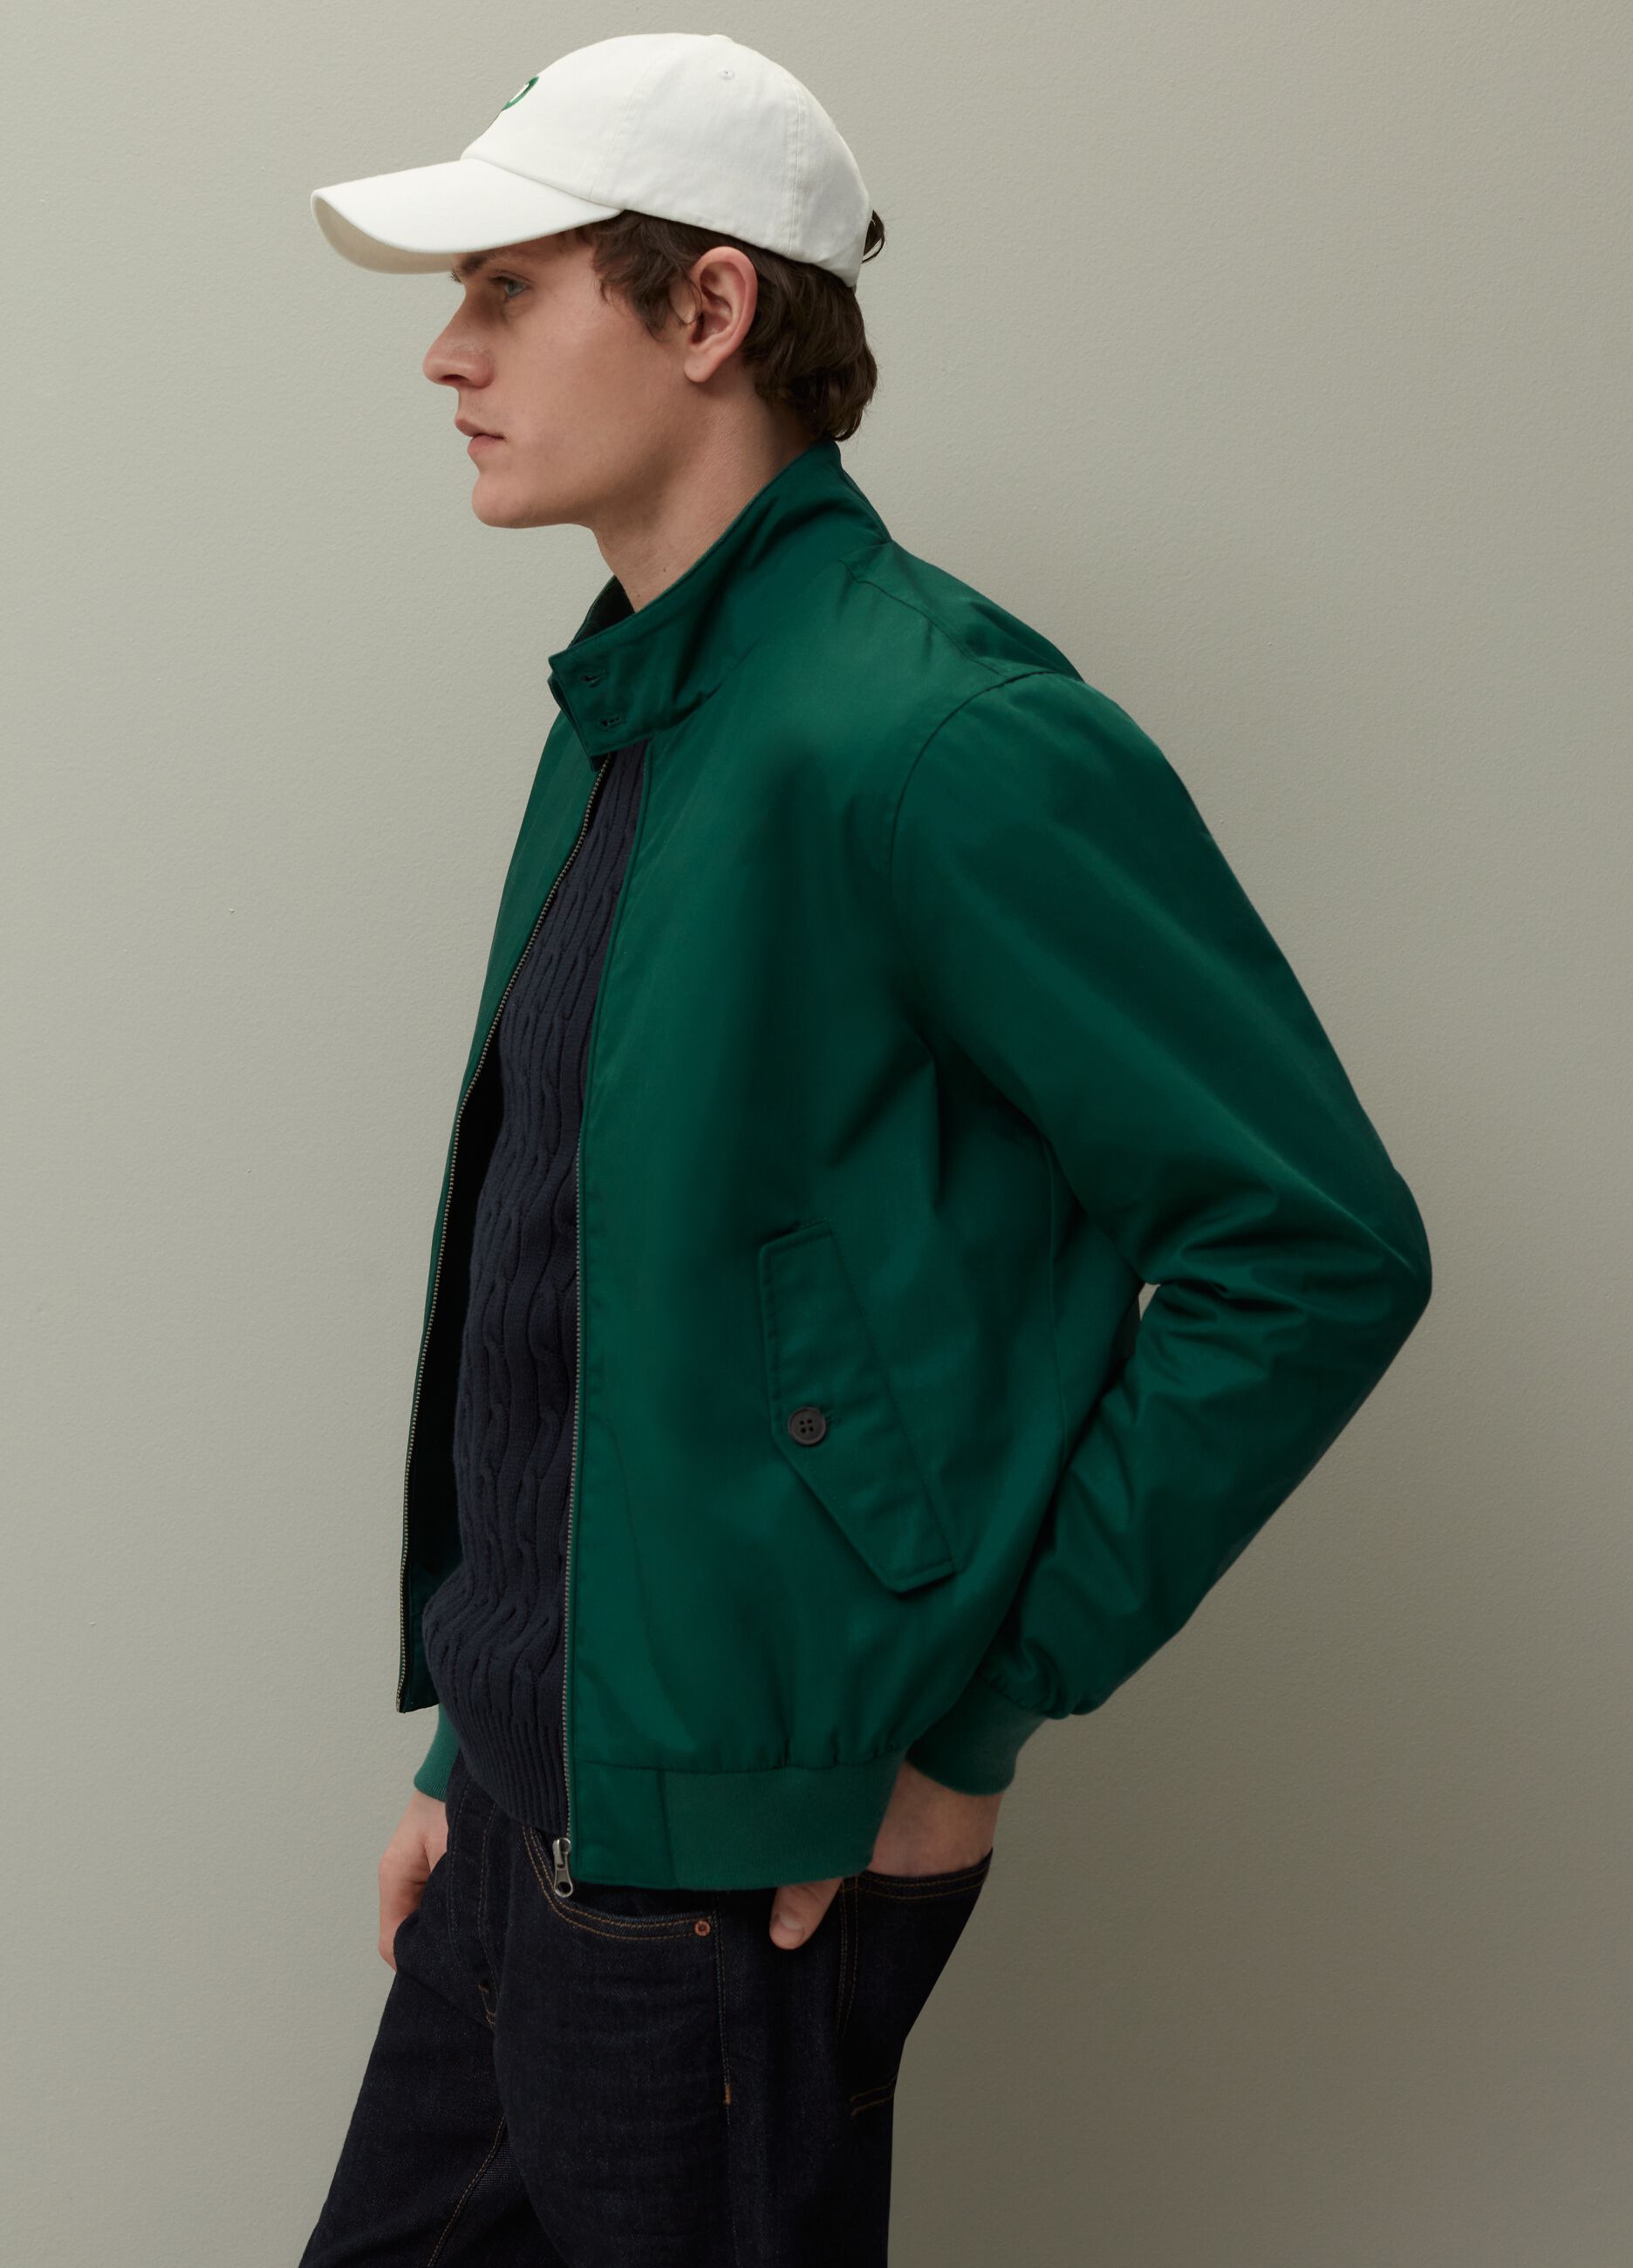 Full-zip, solid colour, bomber jacket